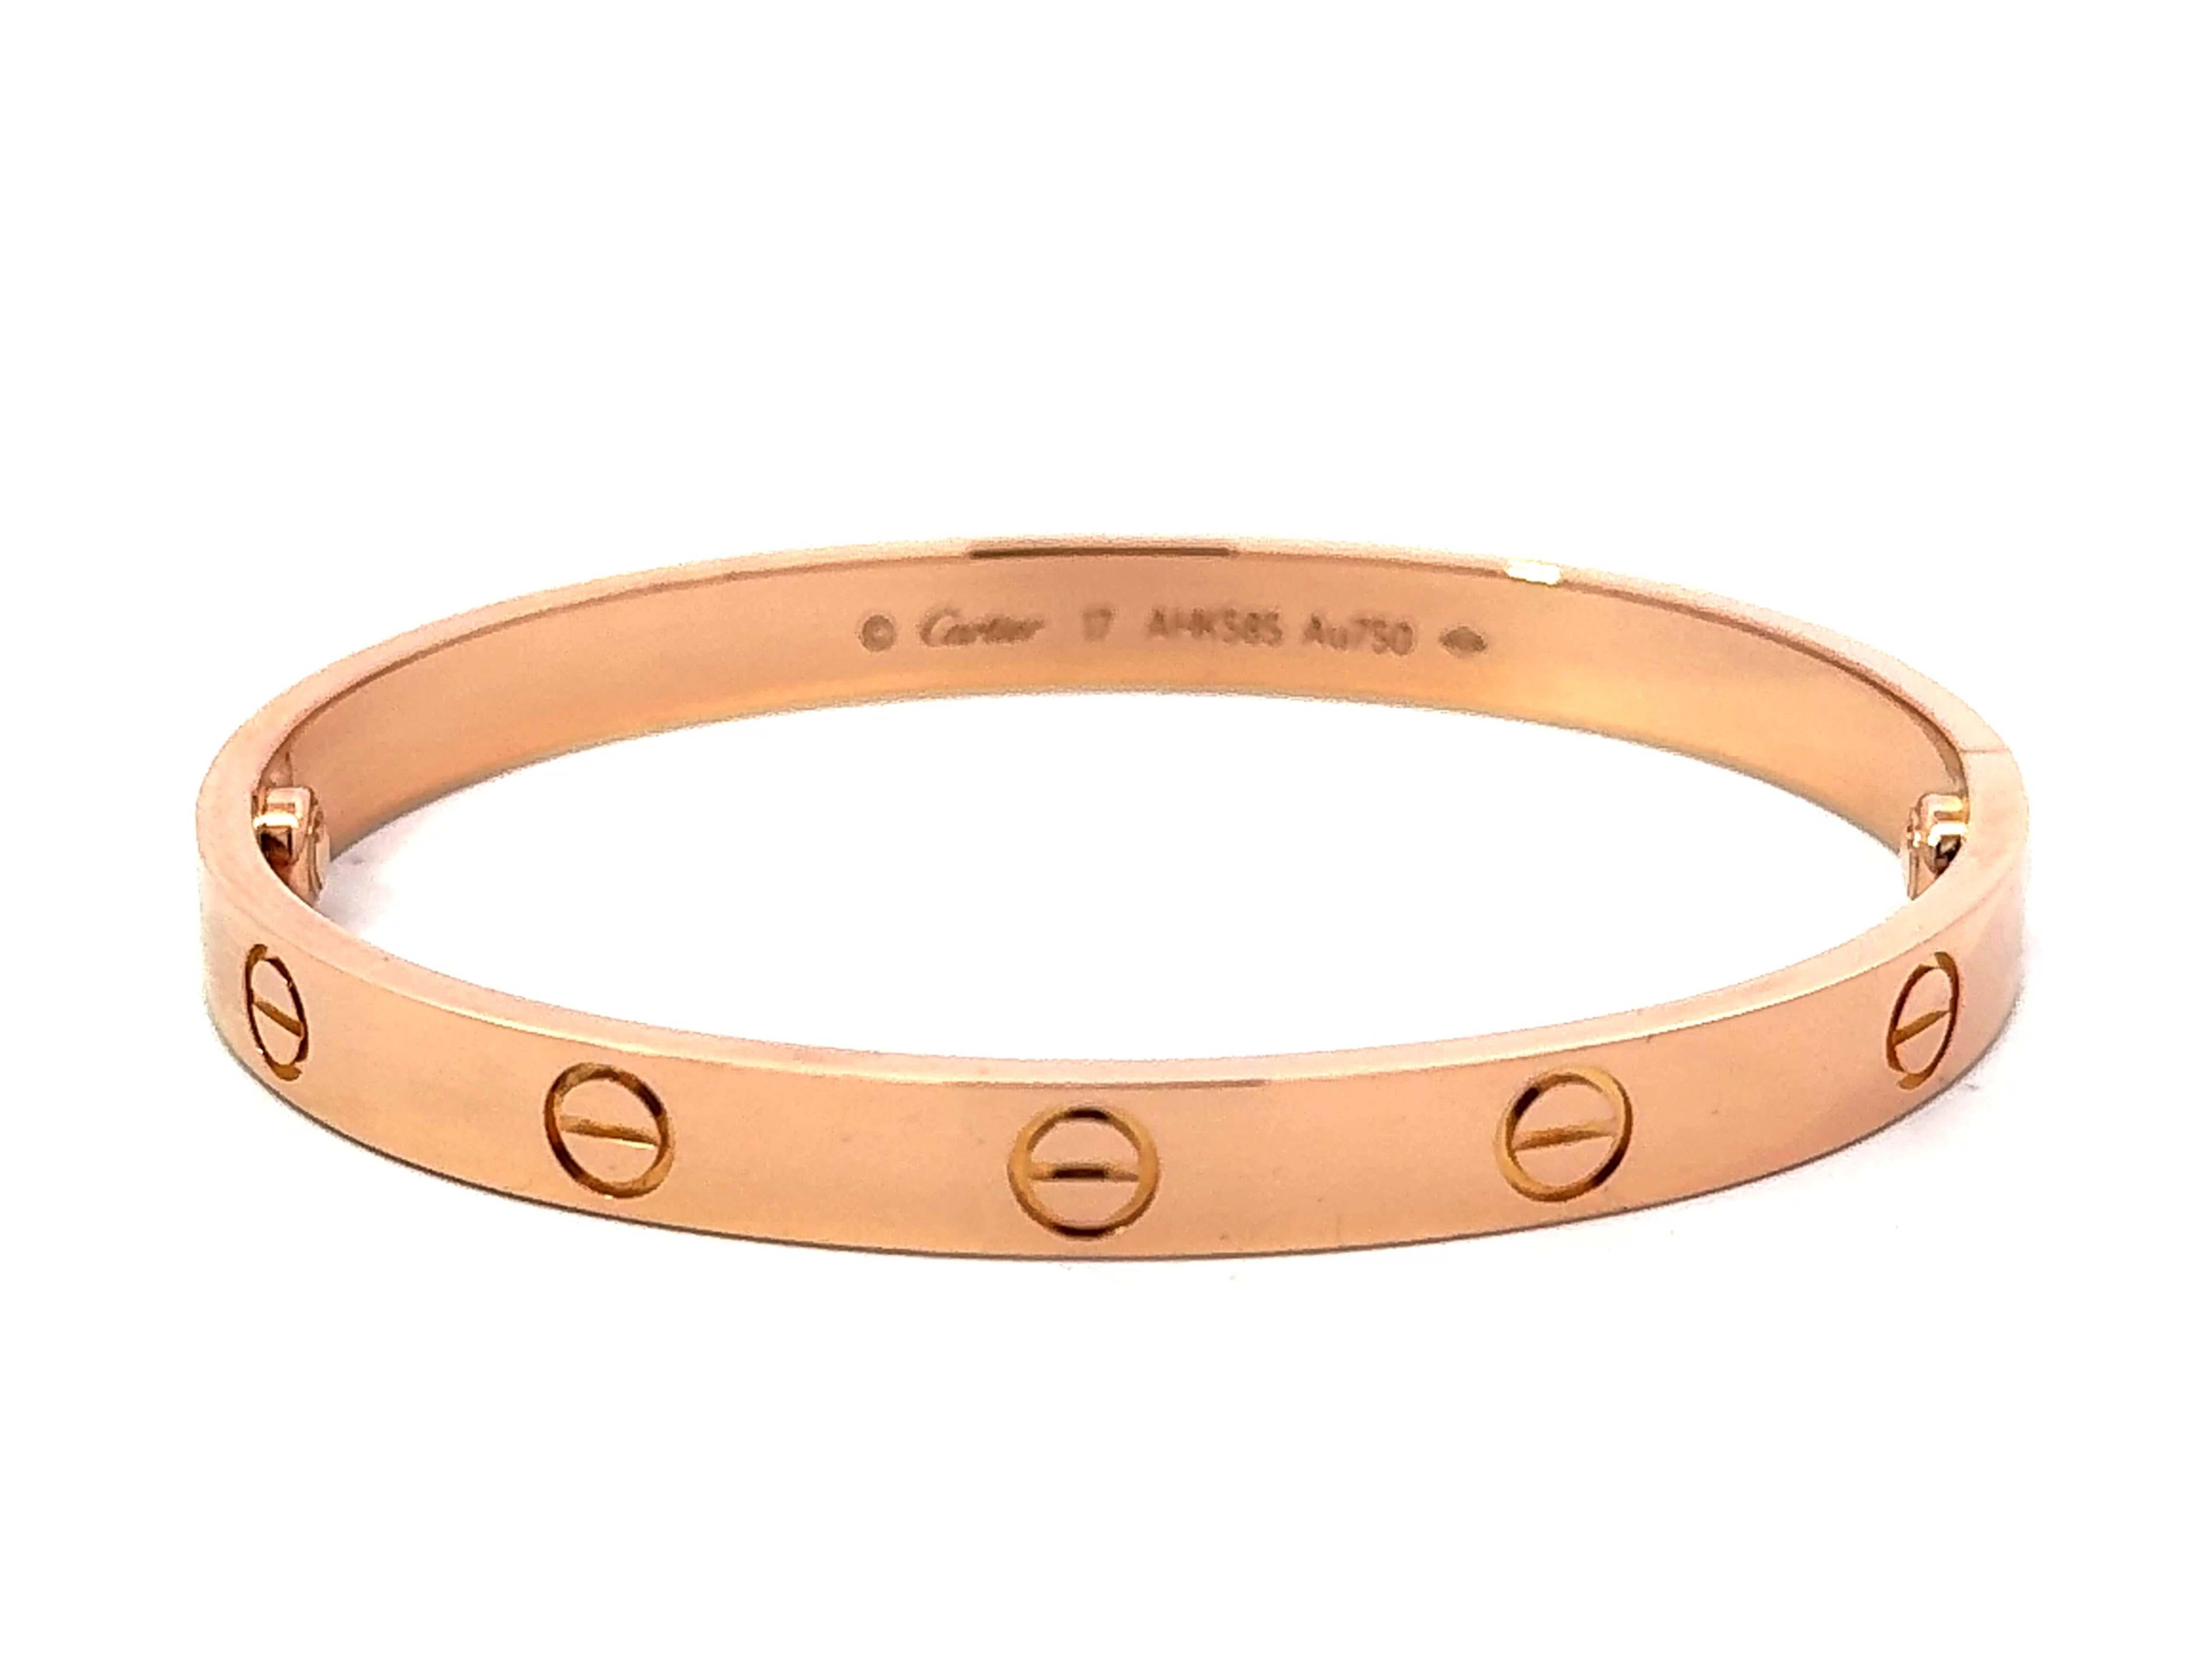 Cartier Love Bracelet in 18K Rose Gold Size 17 With Box and Papers For Sale 3